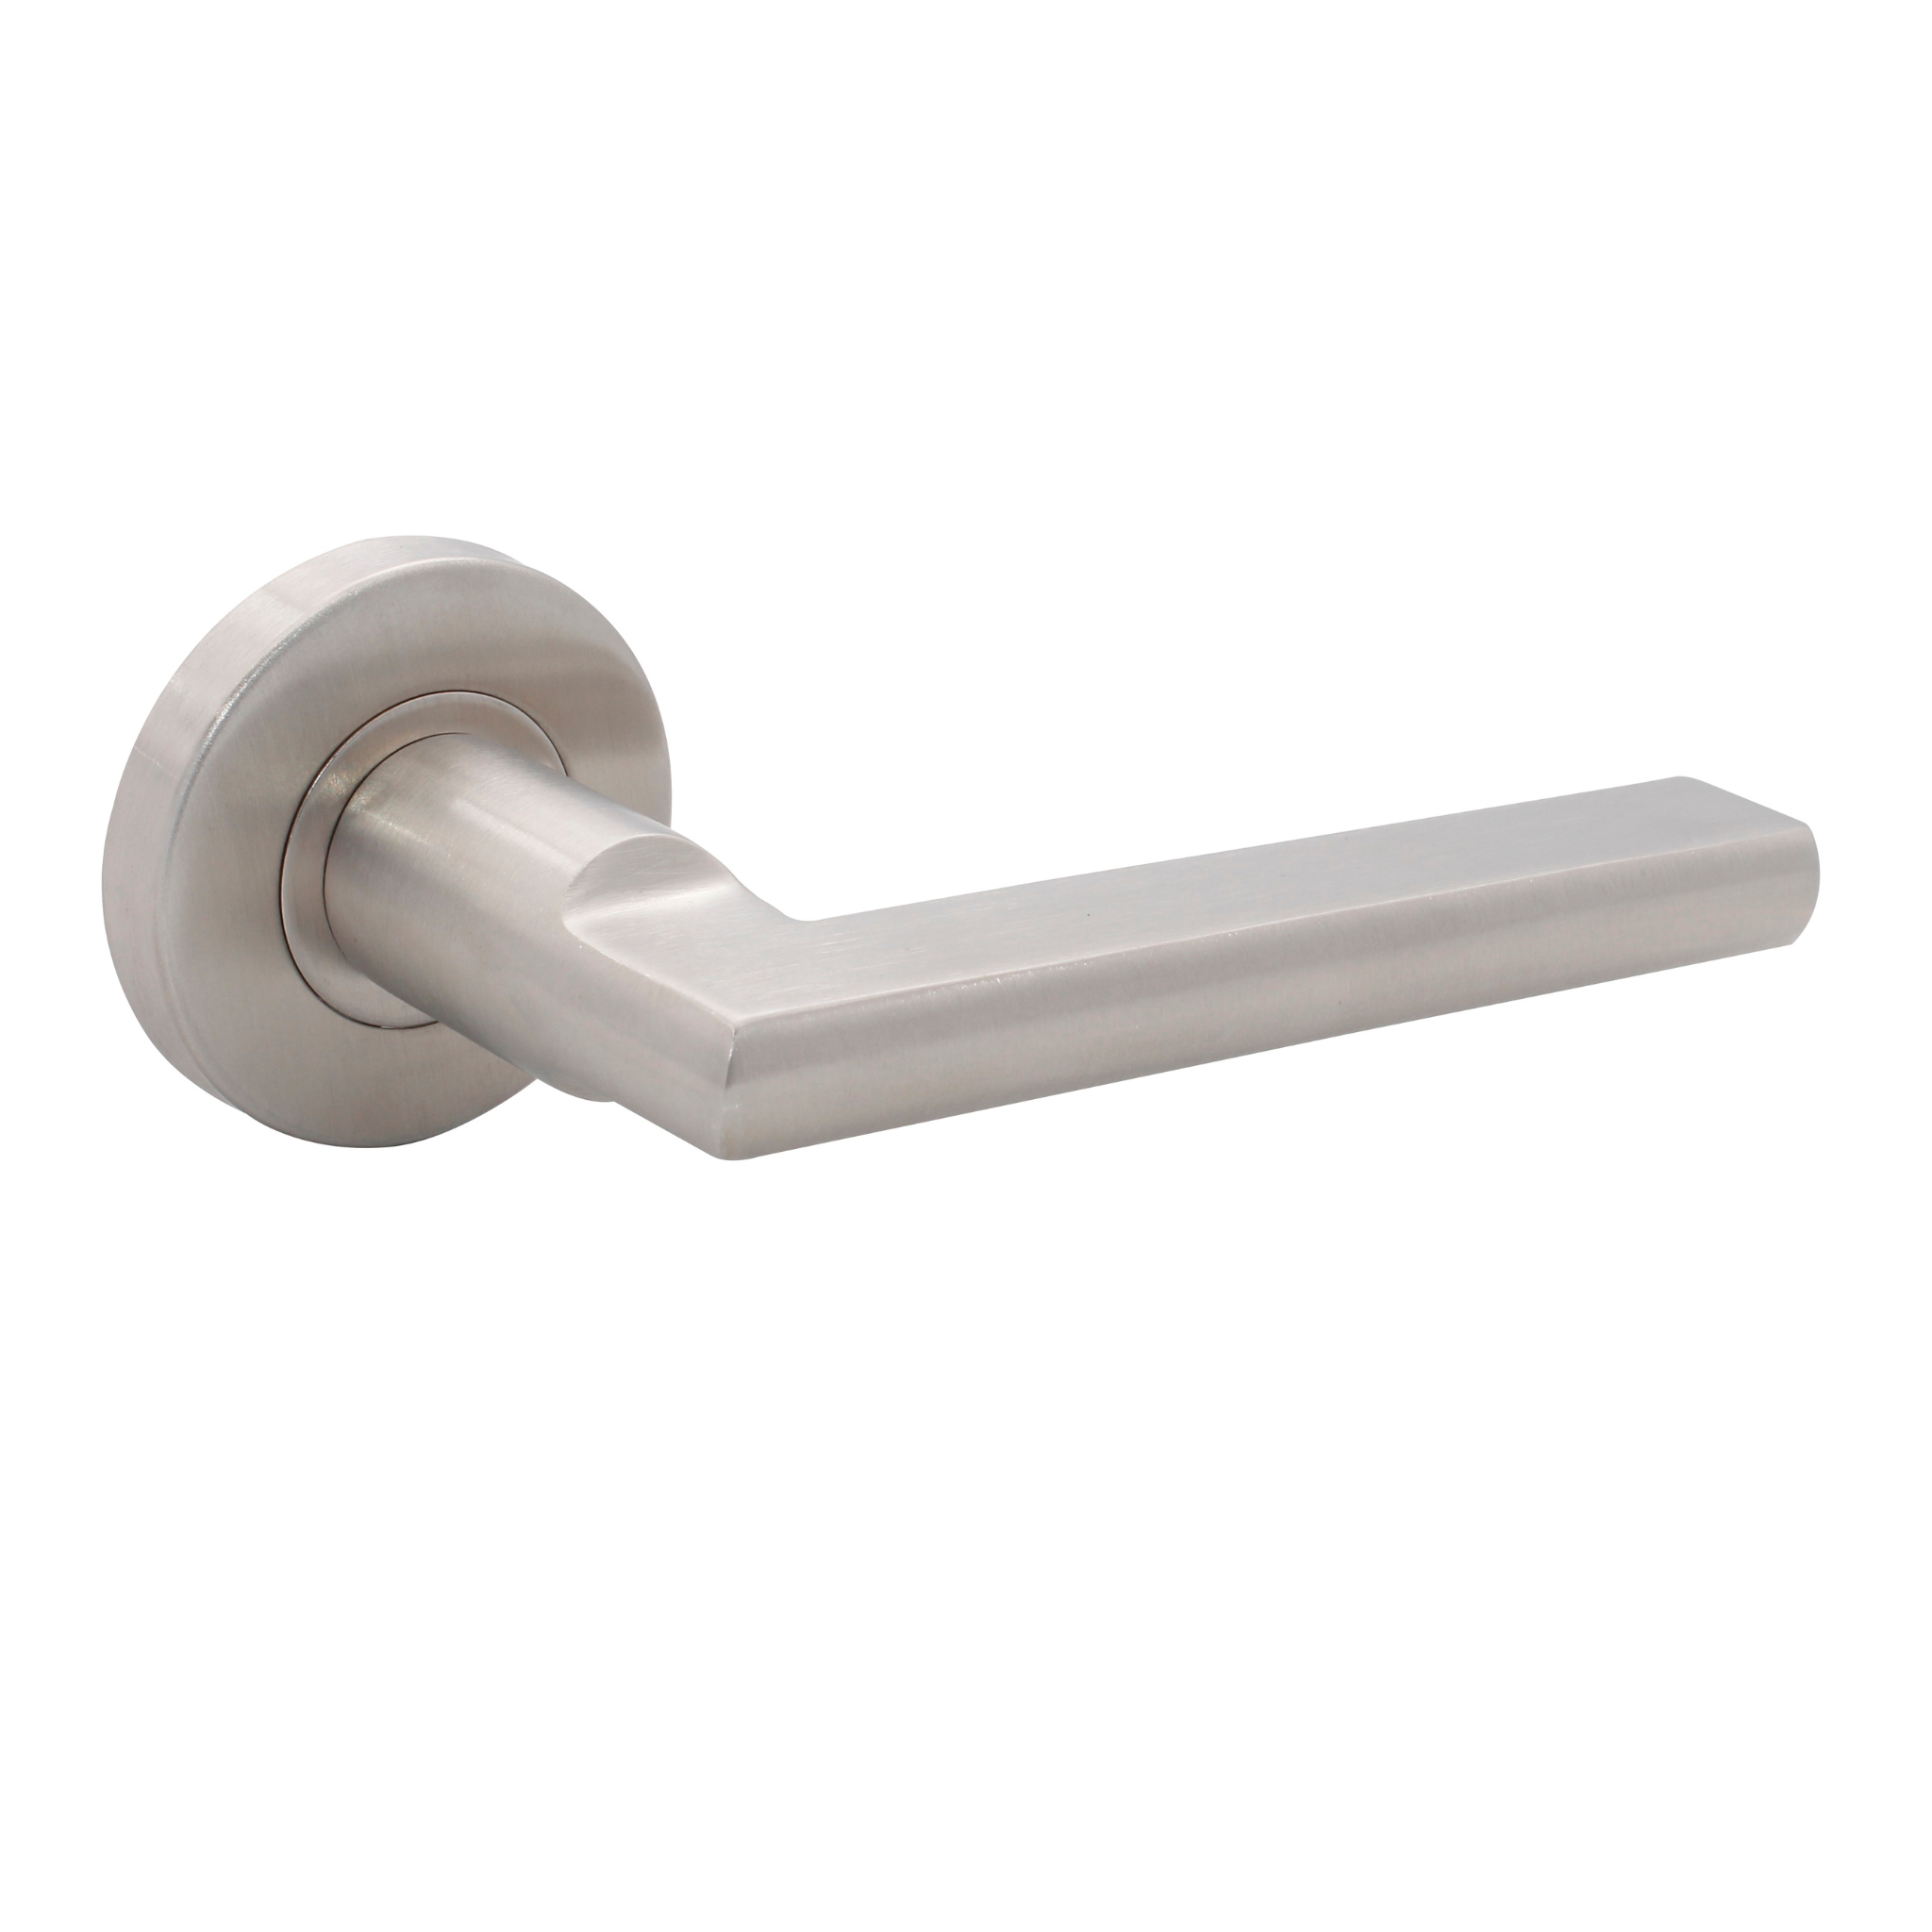 FS103.R._.TR, Lever Handles, Solid, On Round Rose, With Escutcheons, 134mm (l), Stainless Steel with Tarnish Resistant, CISA